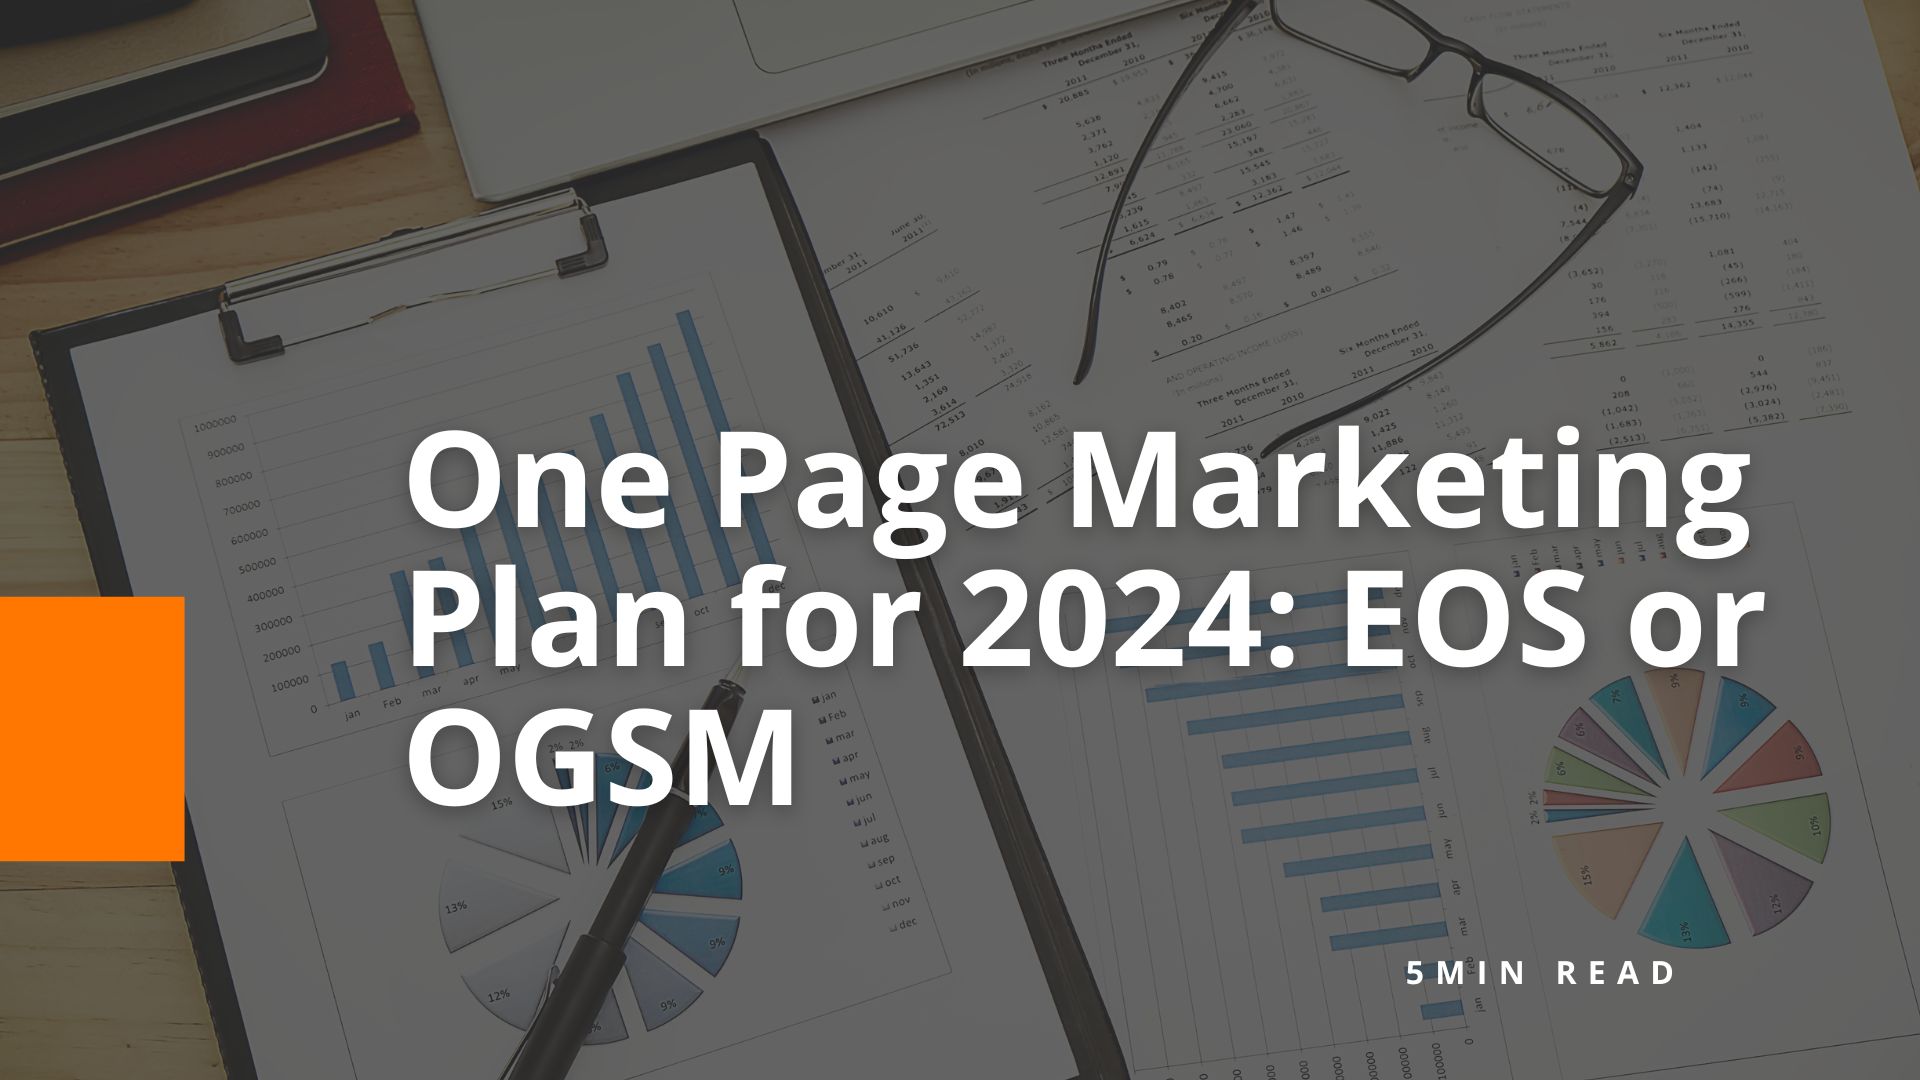 One Page Marketing Plan for 2024 - EOS or OGSM - BOM